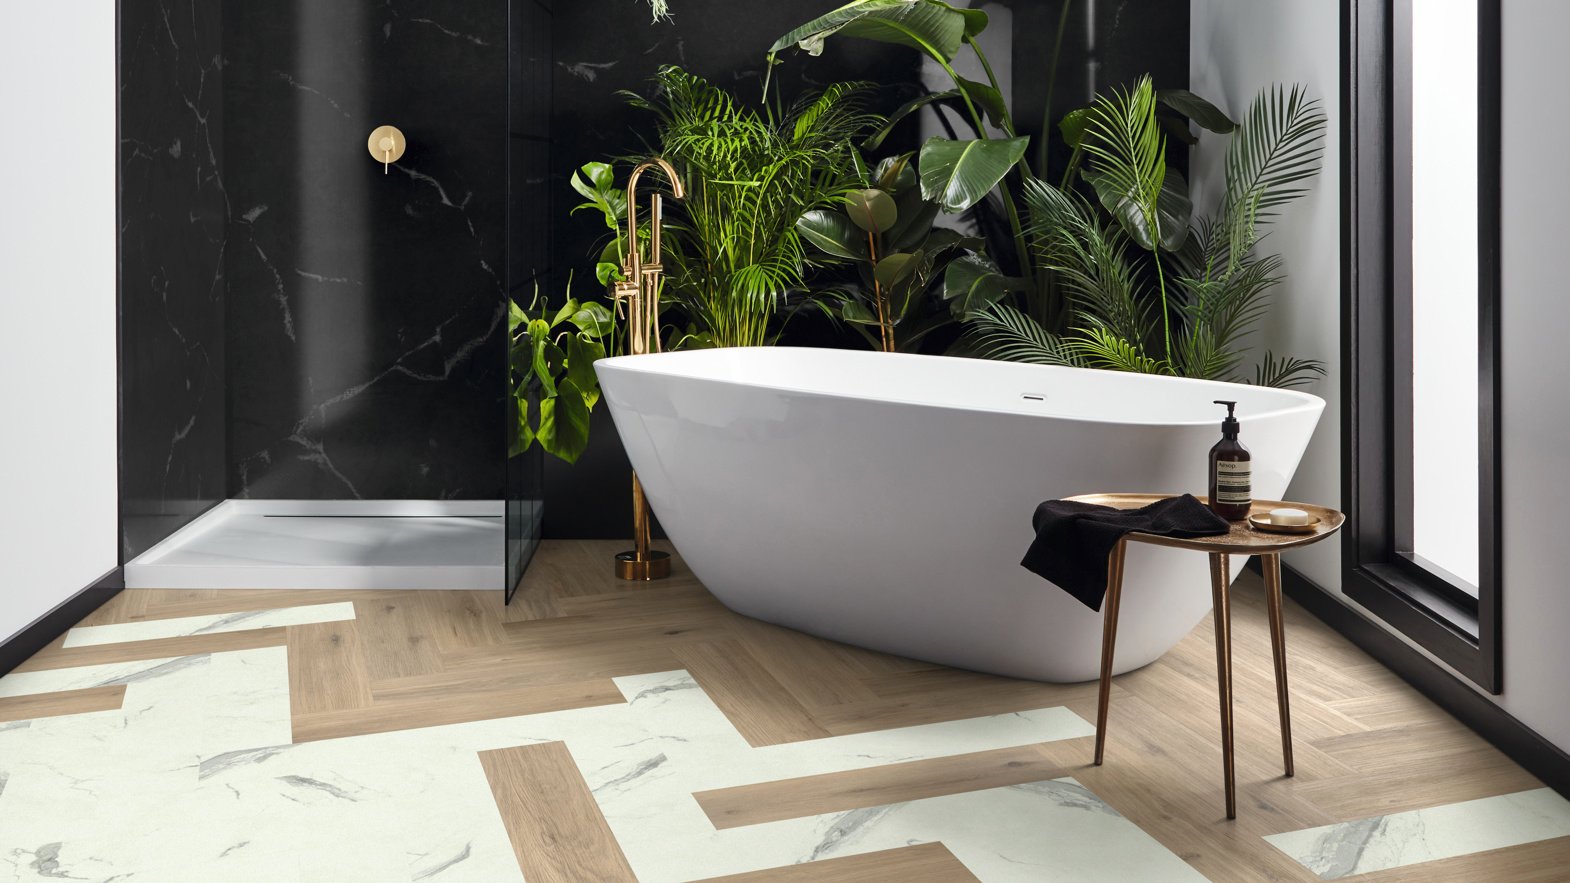 Brown and white herrinbone flooring in a bathroom with a standalone white bath and walk in shower.